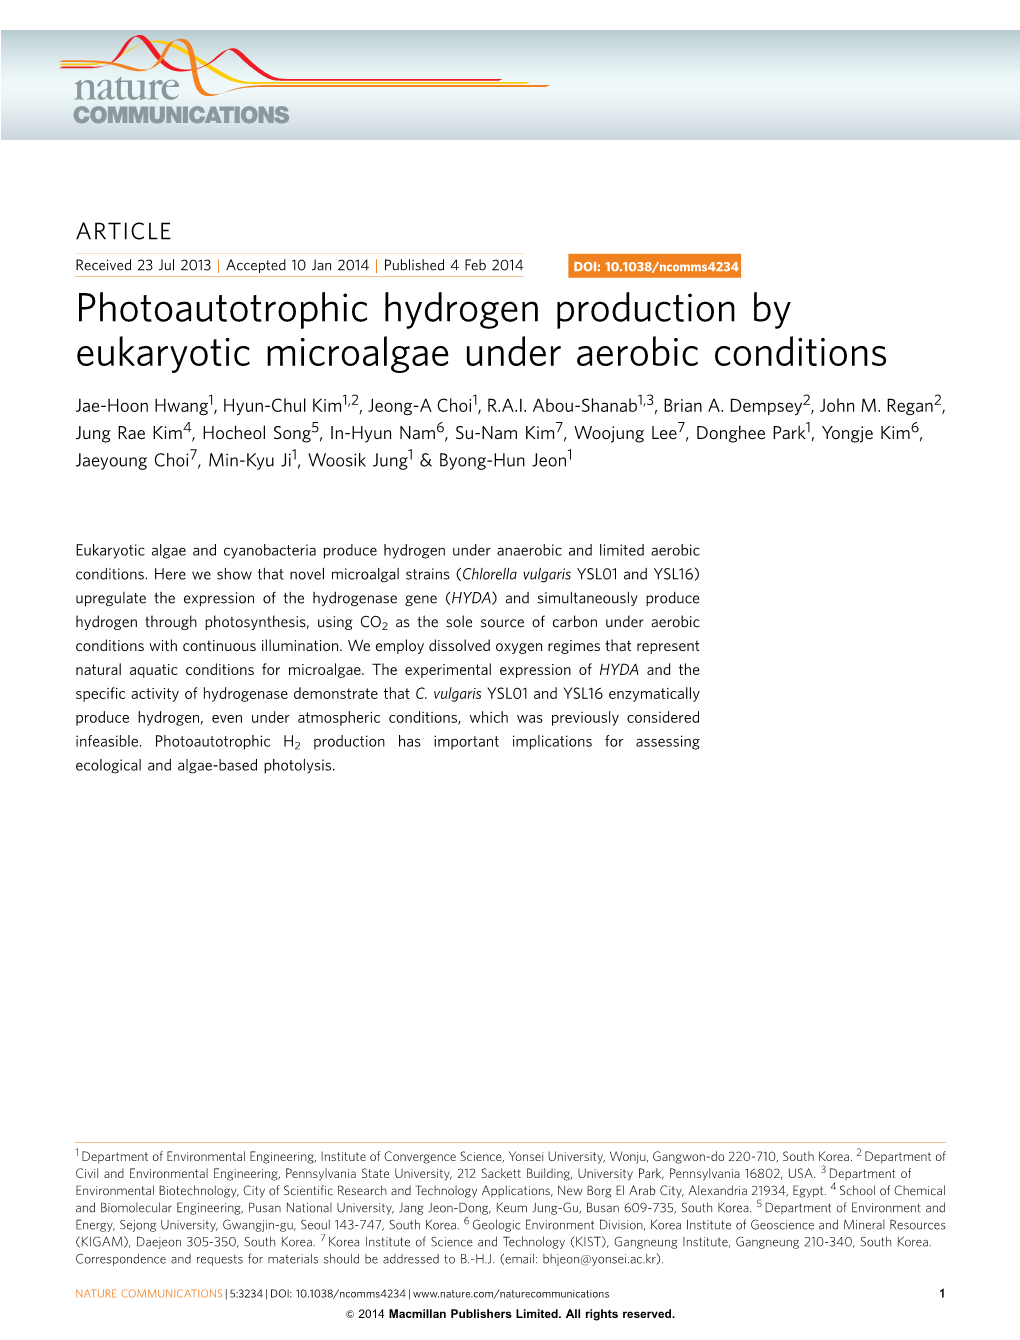 Photoautotrophic Hydrogen Production by Eukaryotic Microalgae Under Aerobic Conditions